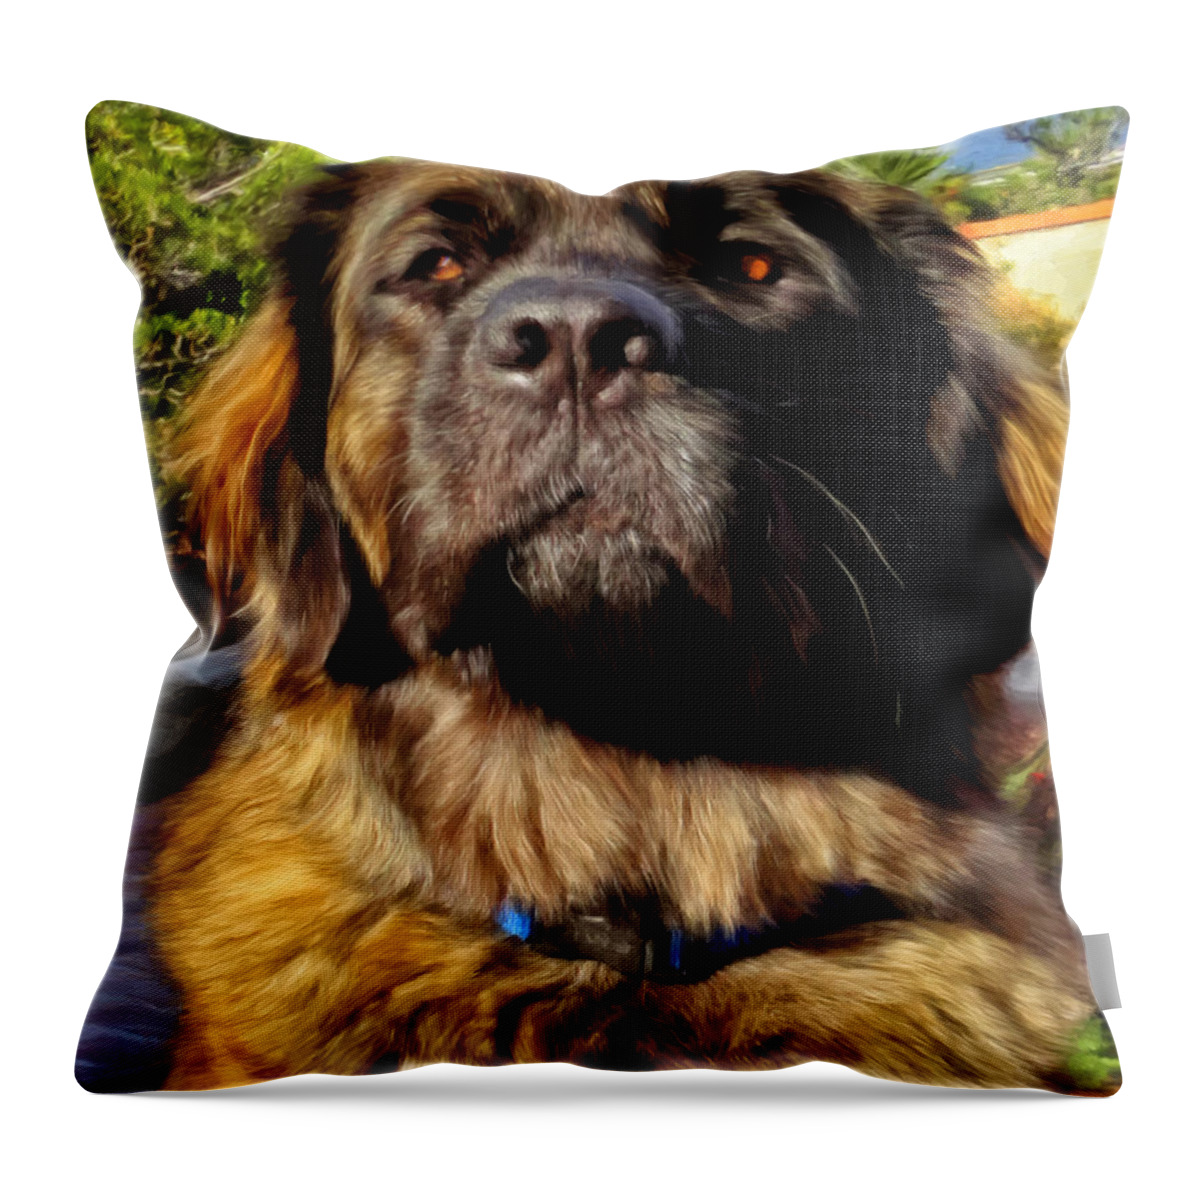  Leonberger Throw Pillow featuring the painting Sweet Emmy by Michael Pickett